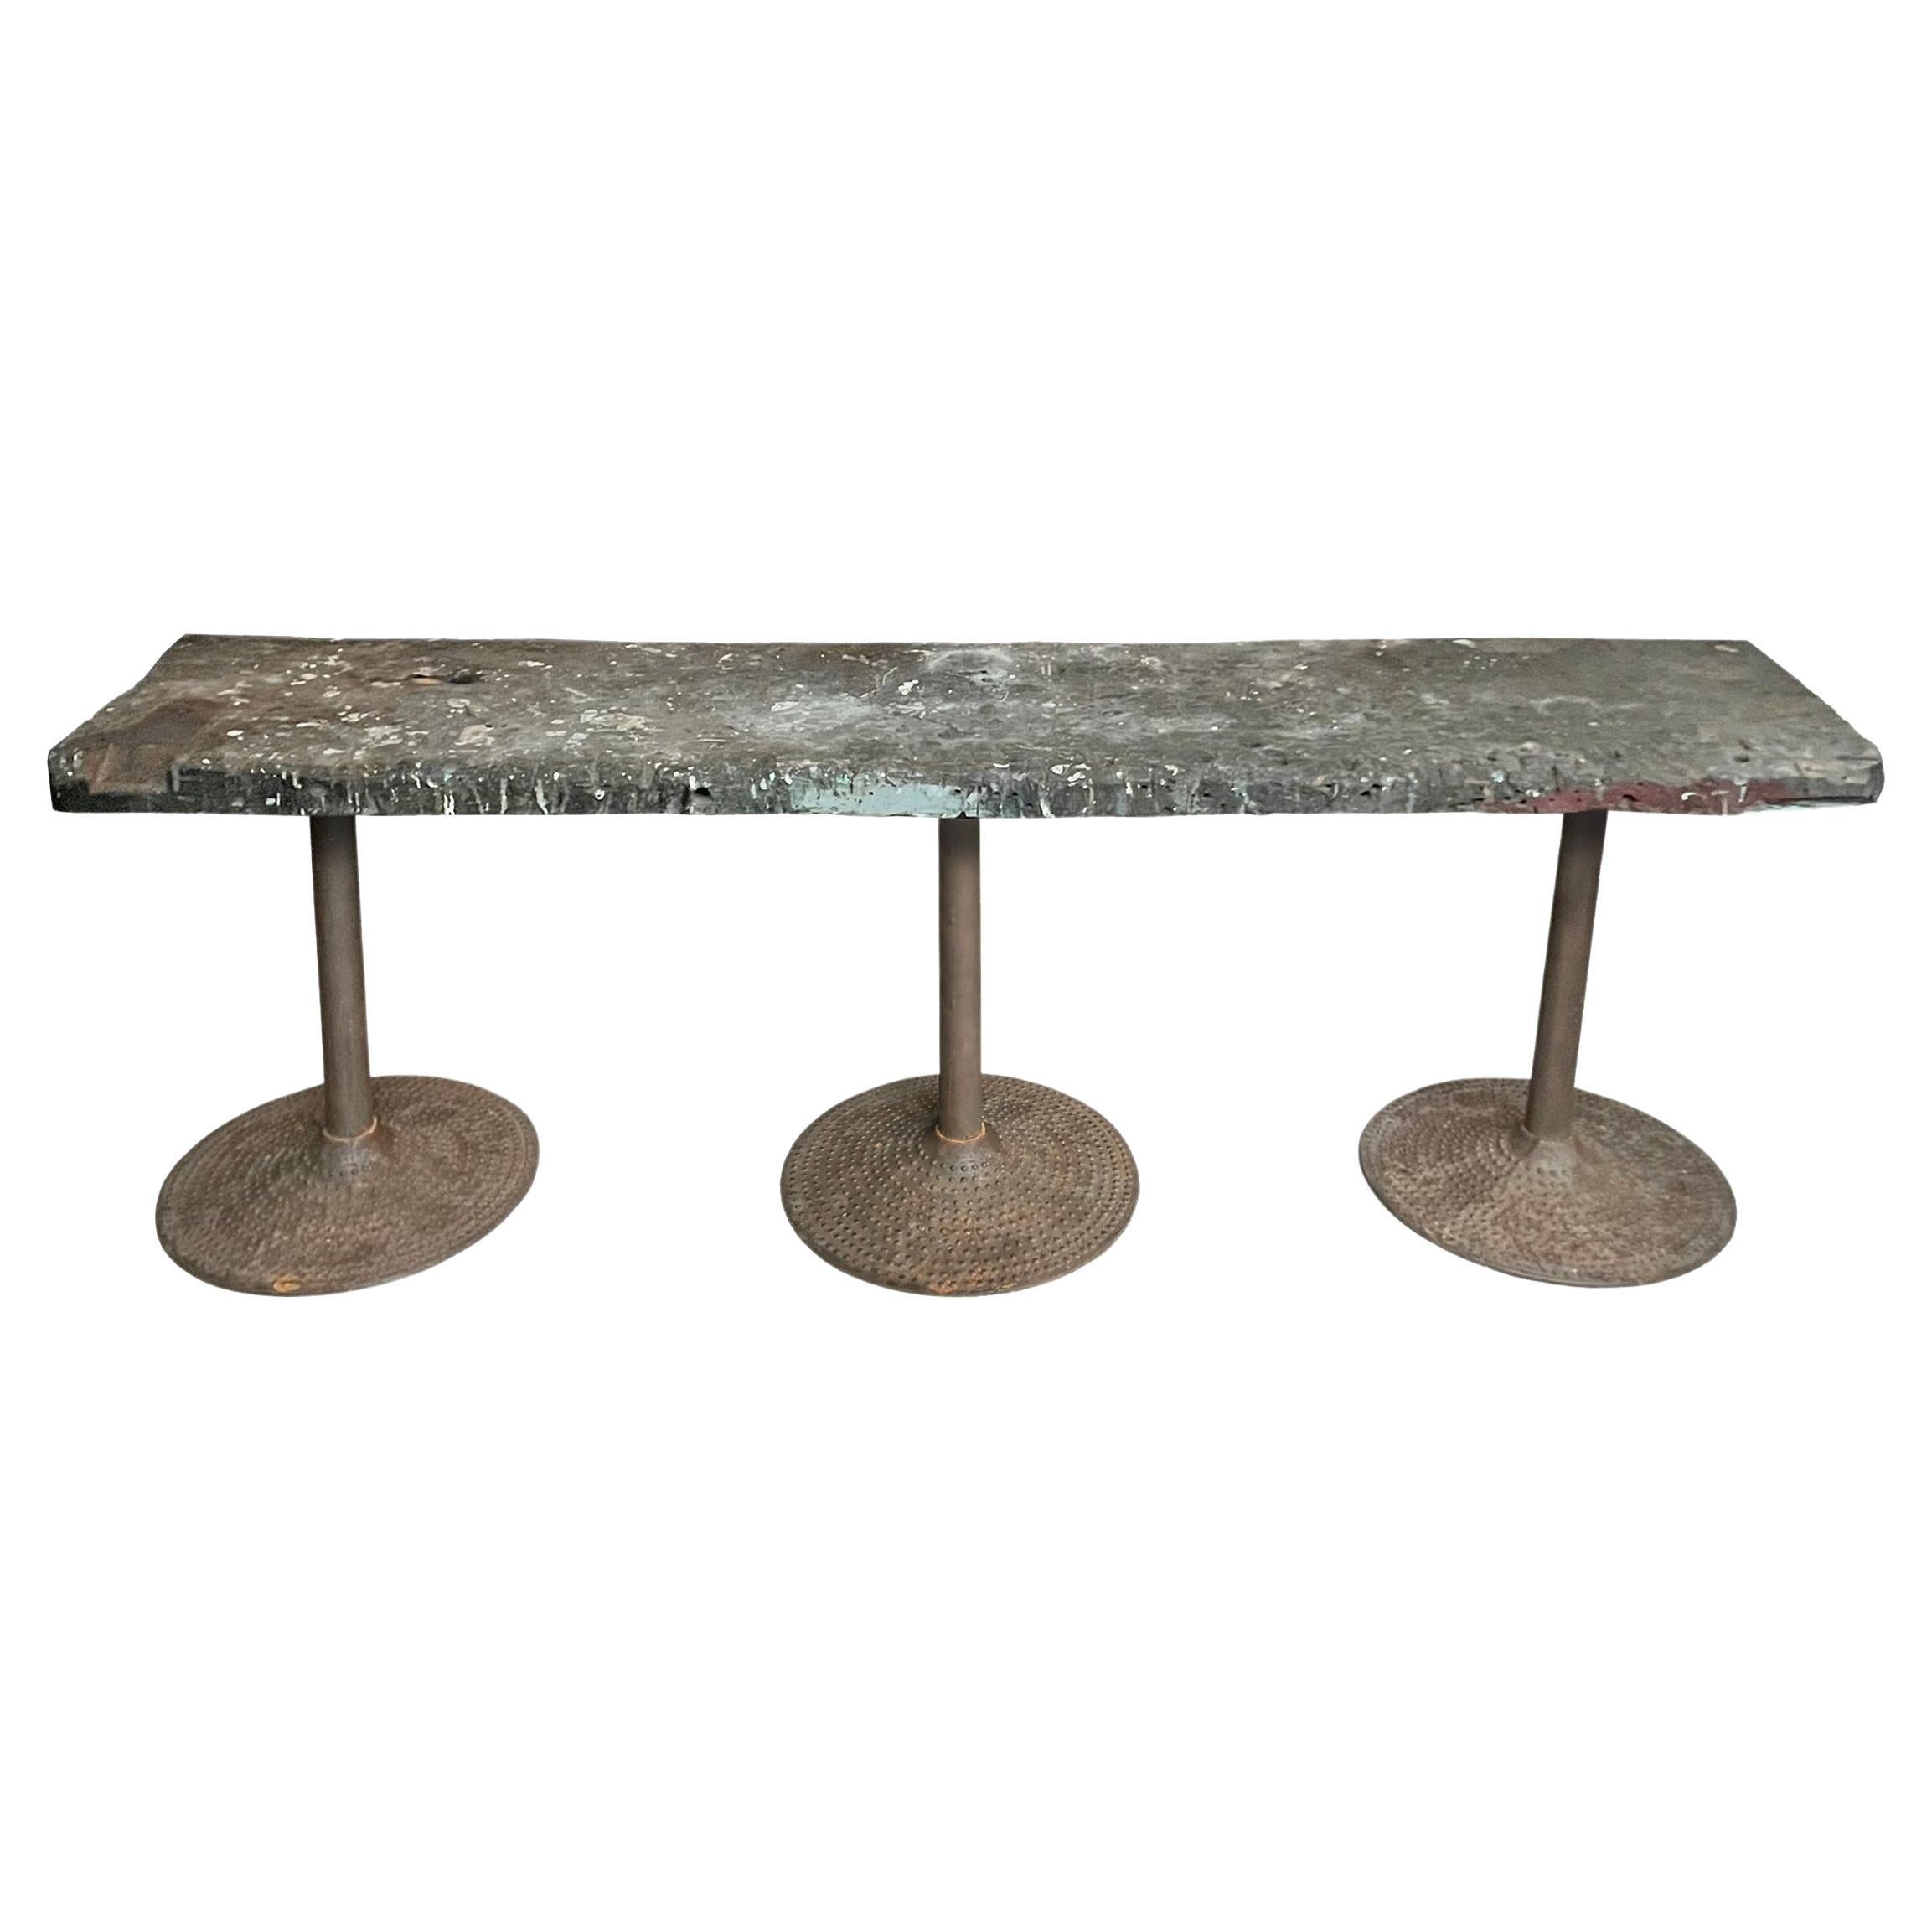 Early 20th Century American Industrial Work Table